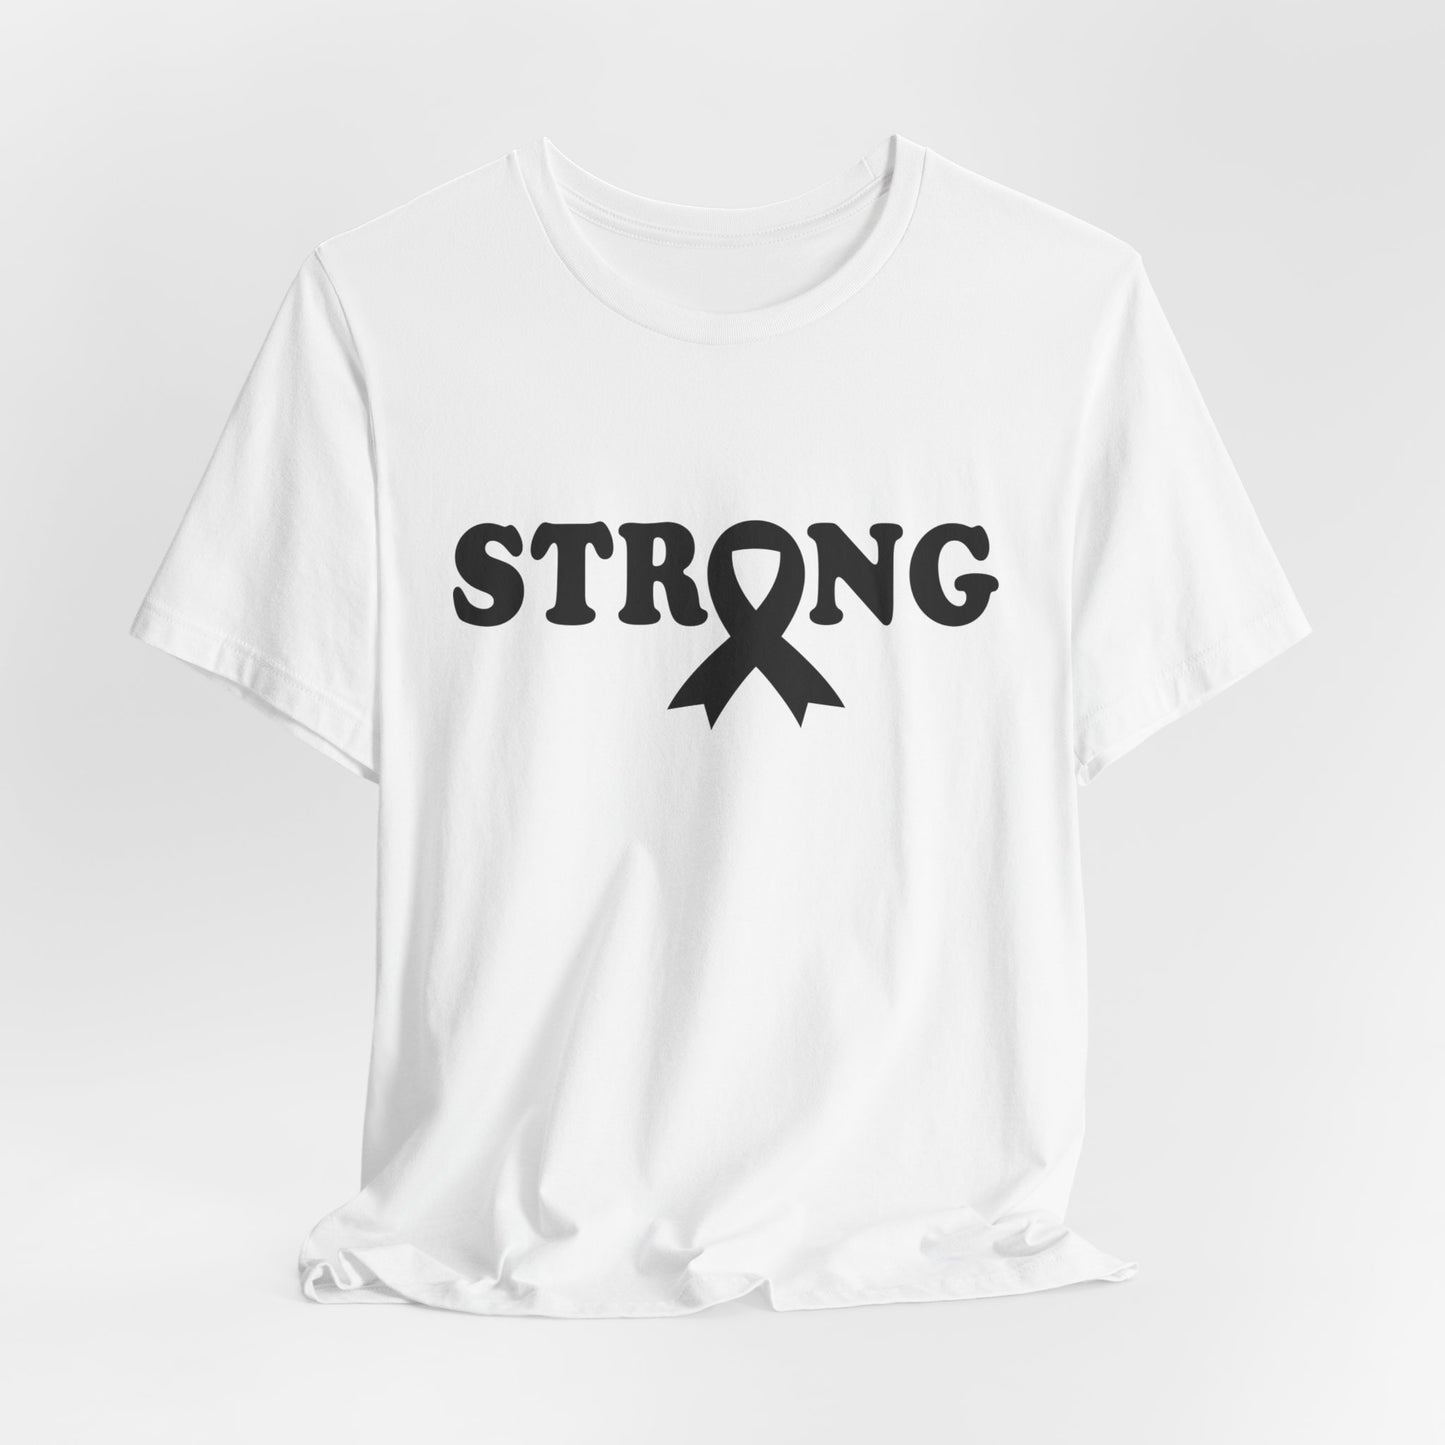 Strong Cancer Advocacy Adult Unisex Short Sleeve Tee